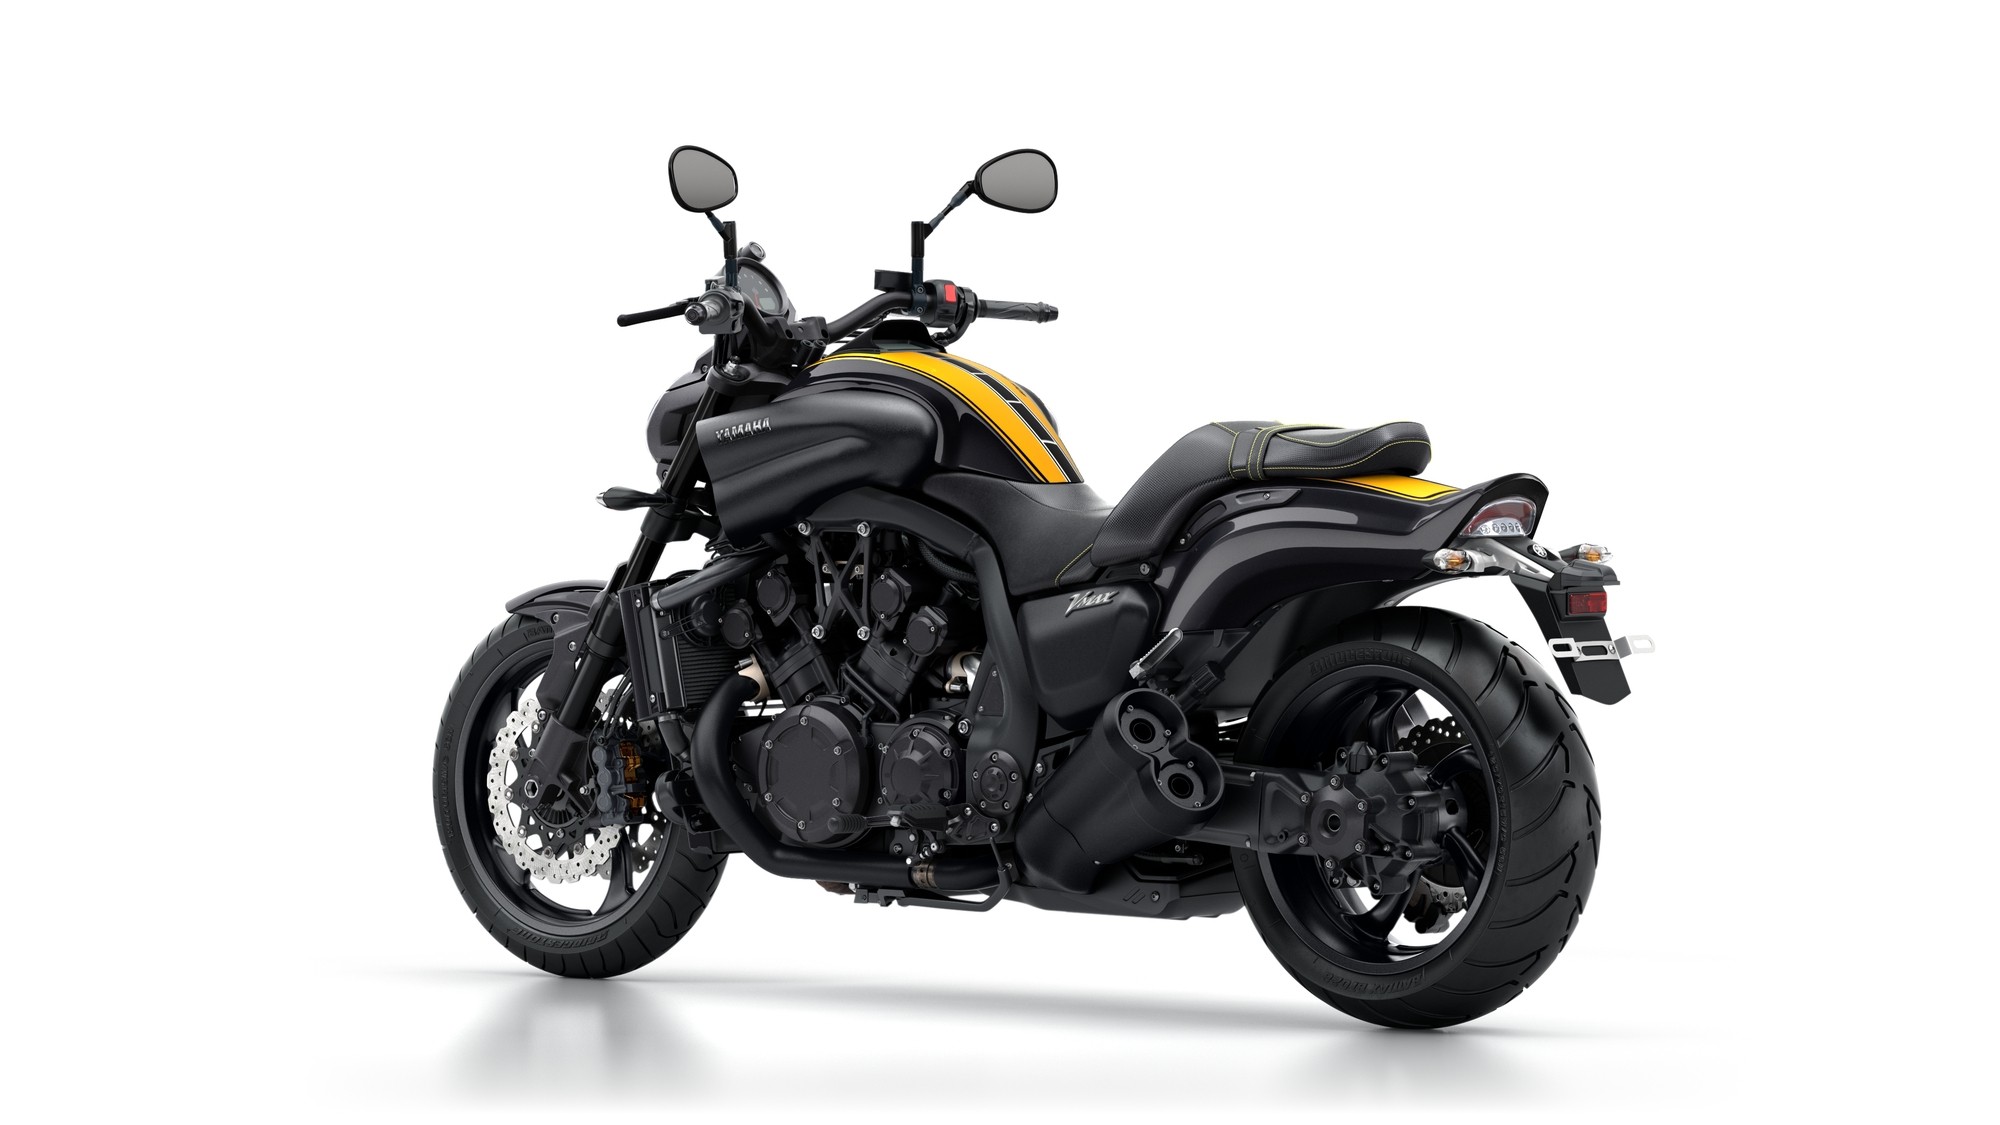 Yamaha V Max Backgrounds, Compatible - PC, Mobile, Gadgets| 2000x1125 px